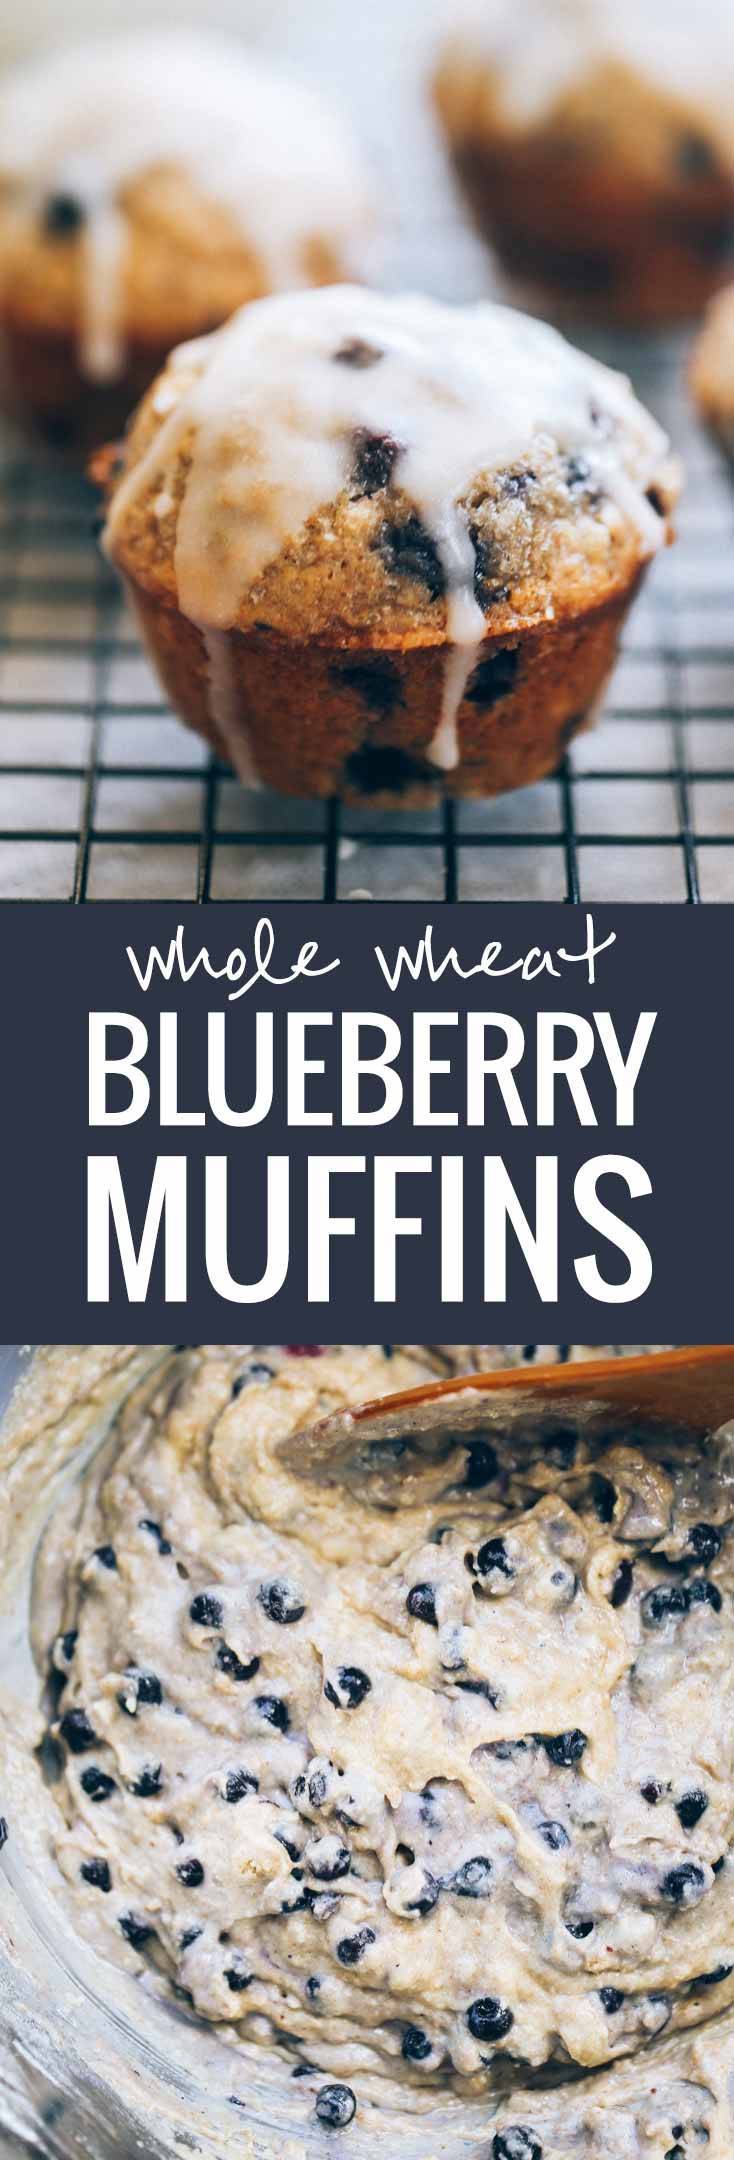 Whole Wheat Blueberry Muffins with a perfect butter glaze! These muffins are a must for a simple, classic brunch.